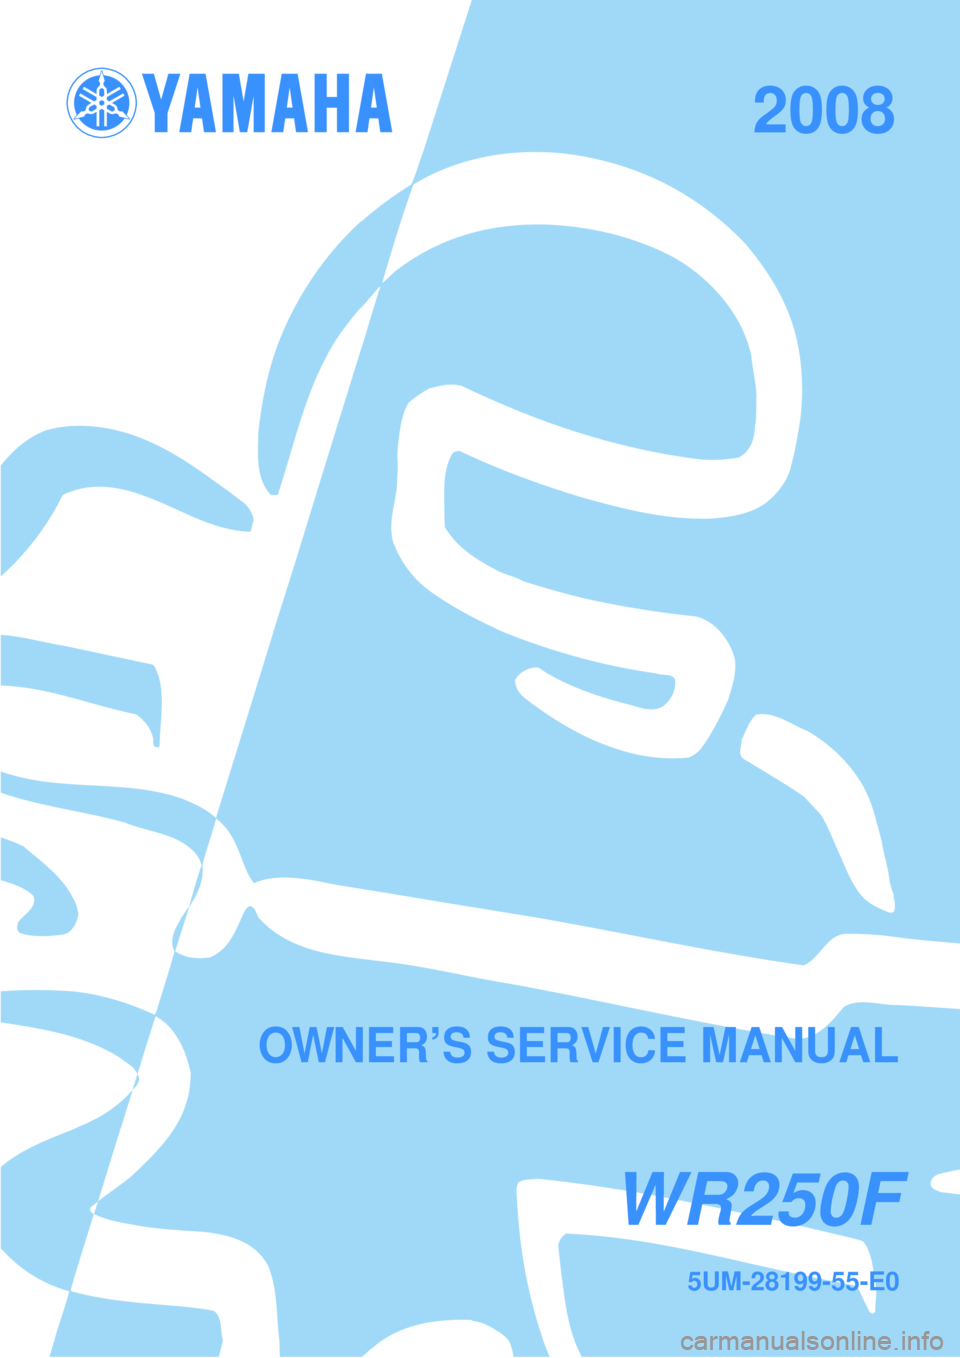 YAMAHA WR 250F 2008  Owners Manual WR250F
5UM-28199-55-E0
2008
OWNER’S SERVICE MANUAL 